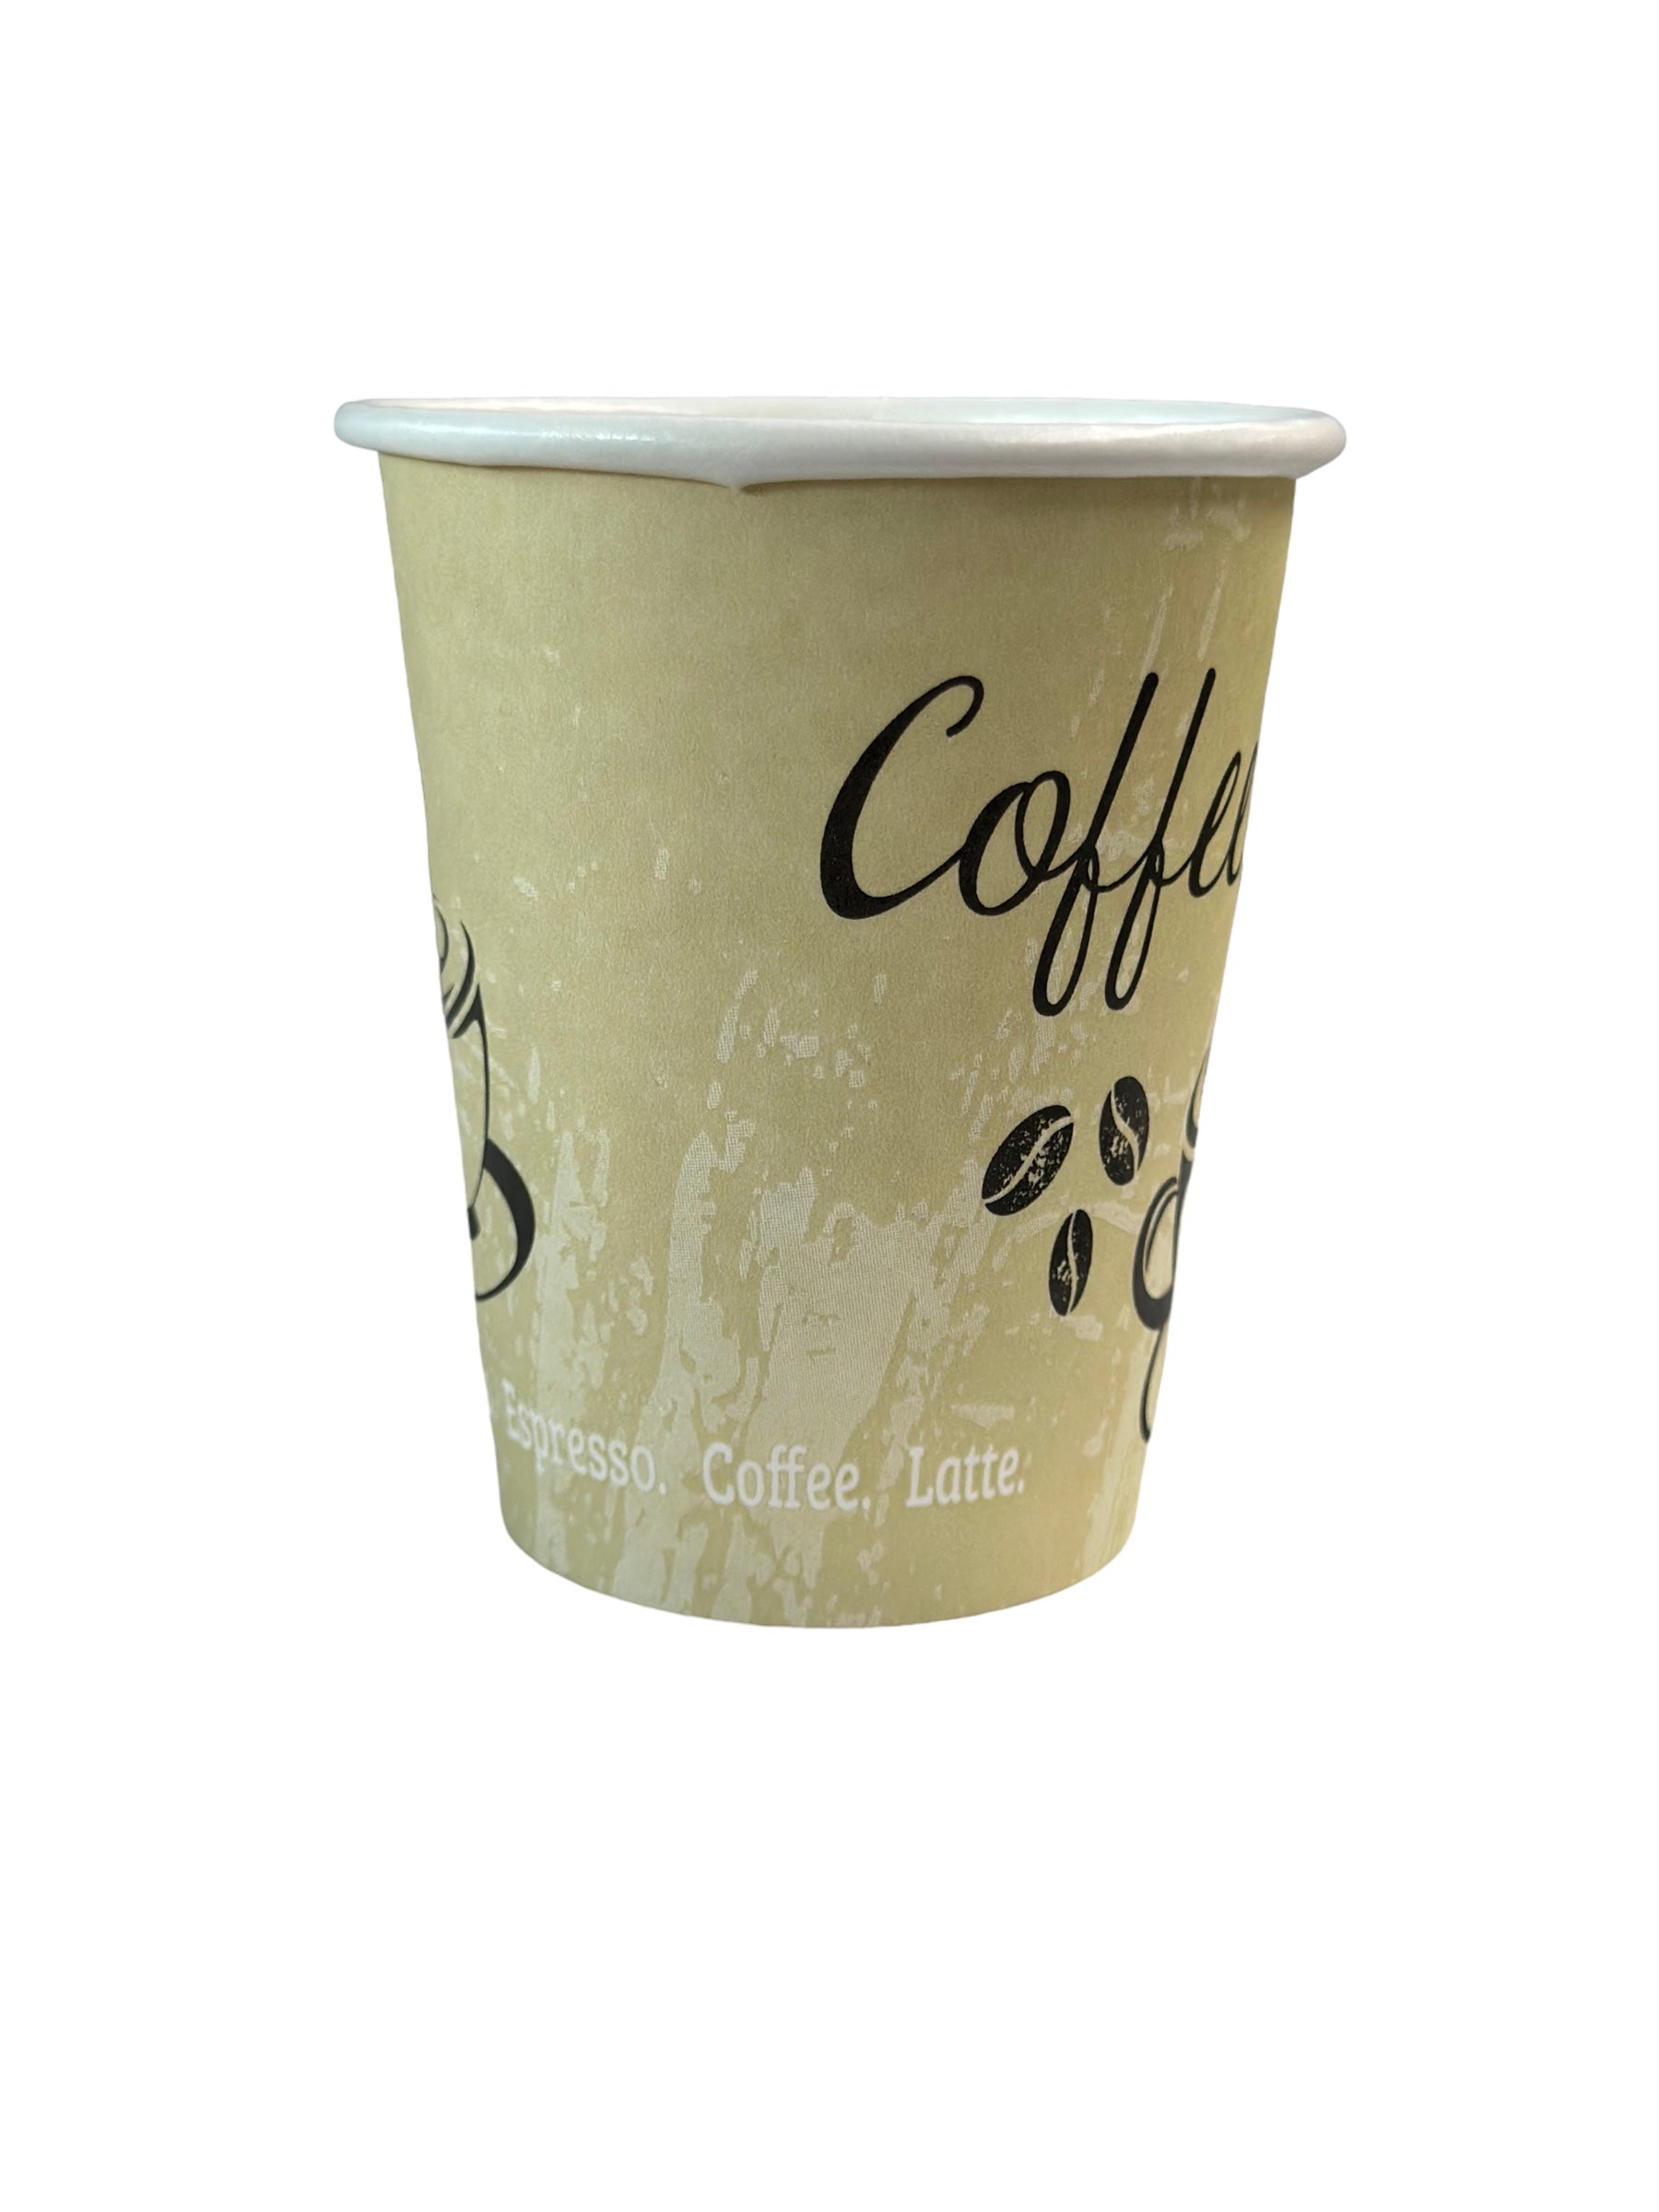 Solo Hot Cups, To Go, 16 Ounce, Plates, Bowls & Cups